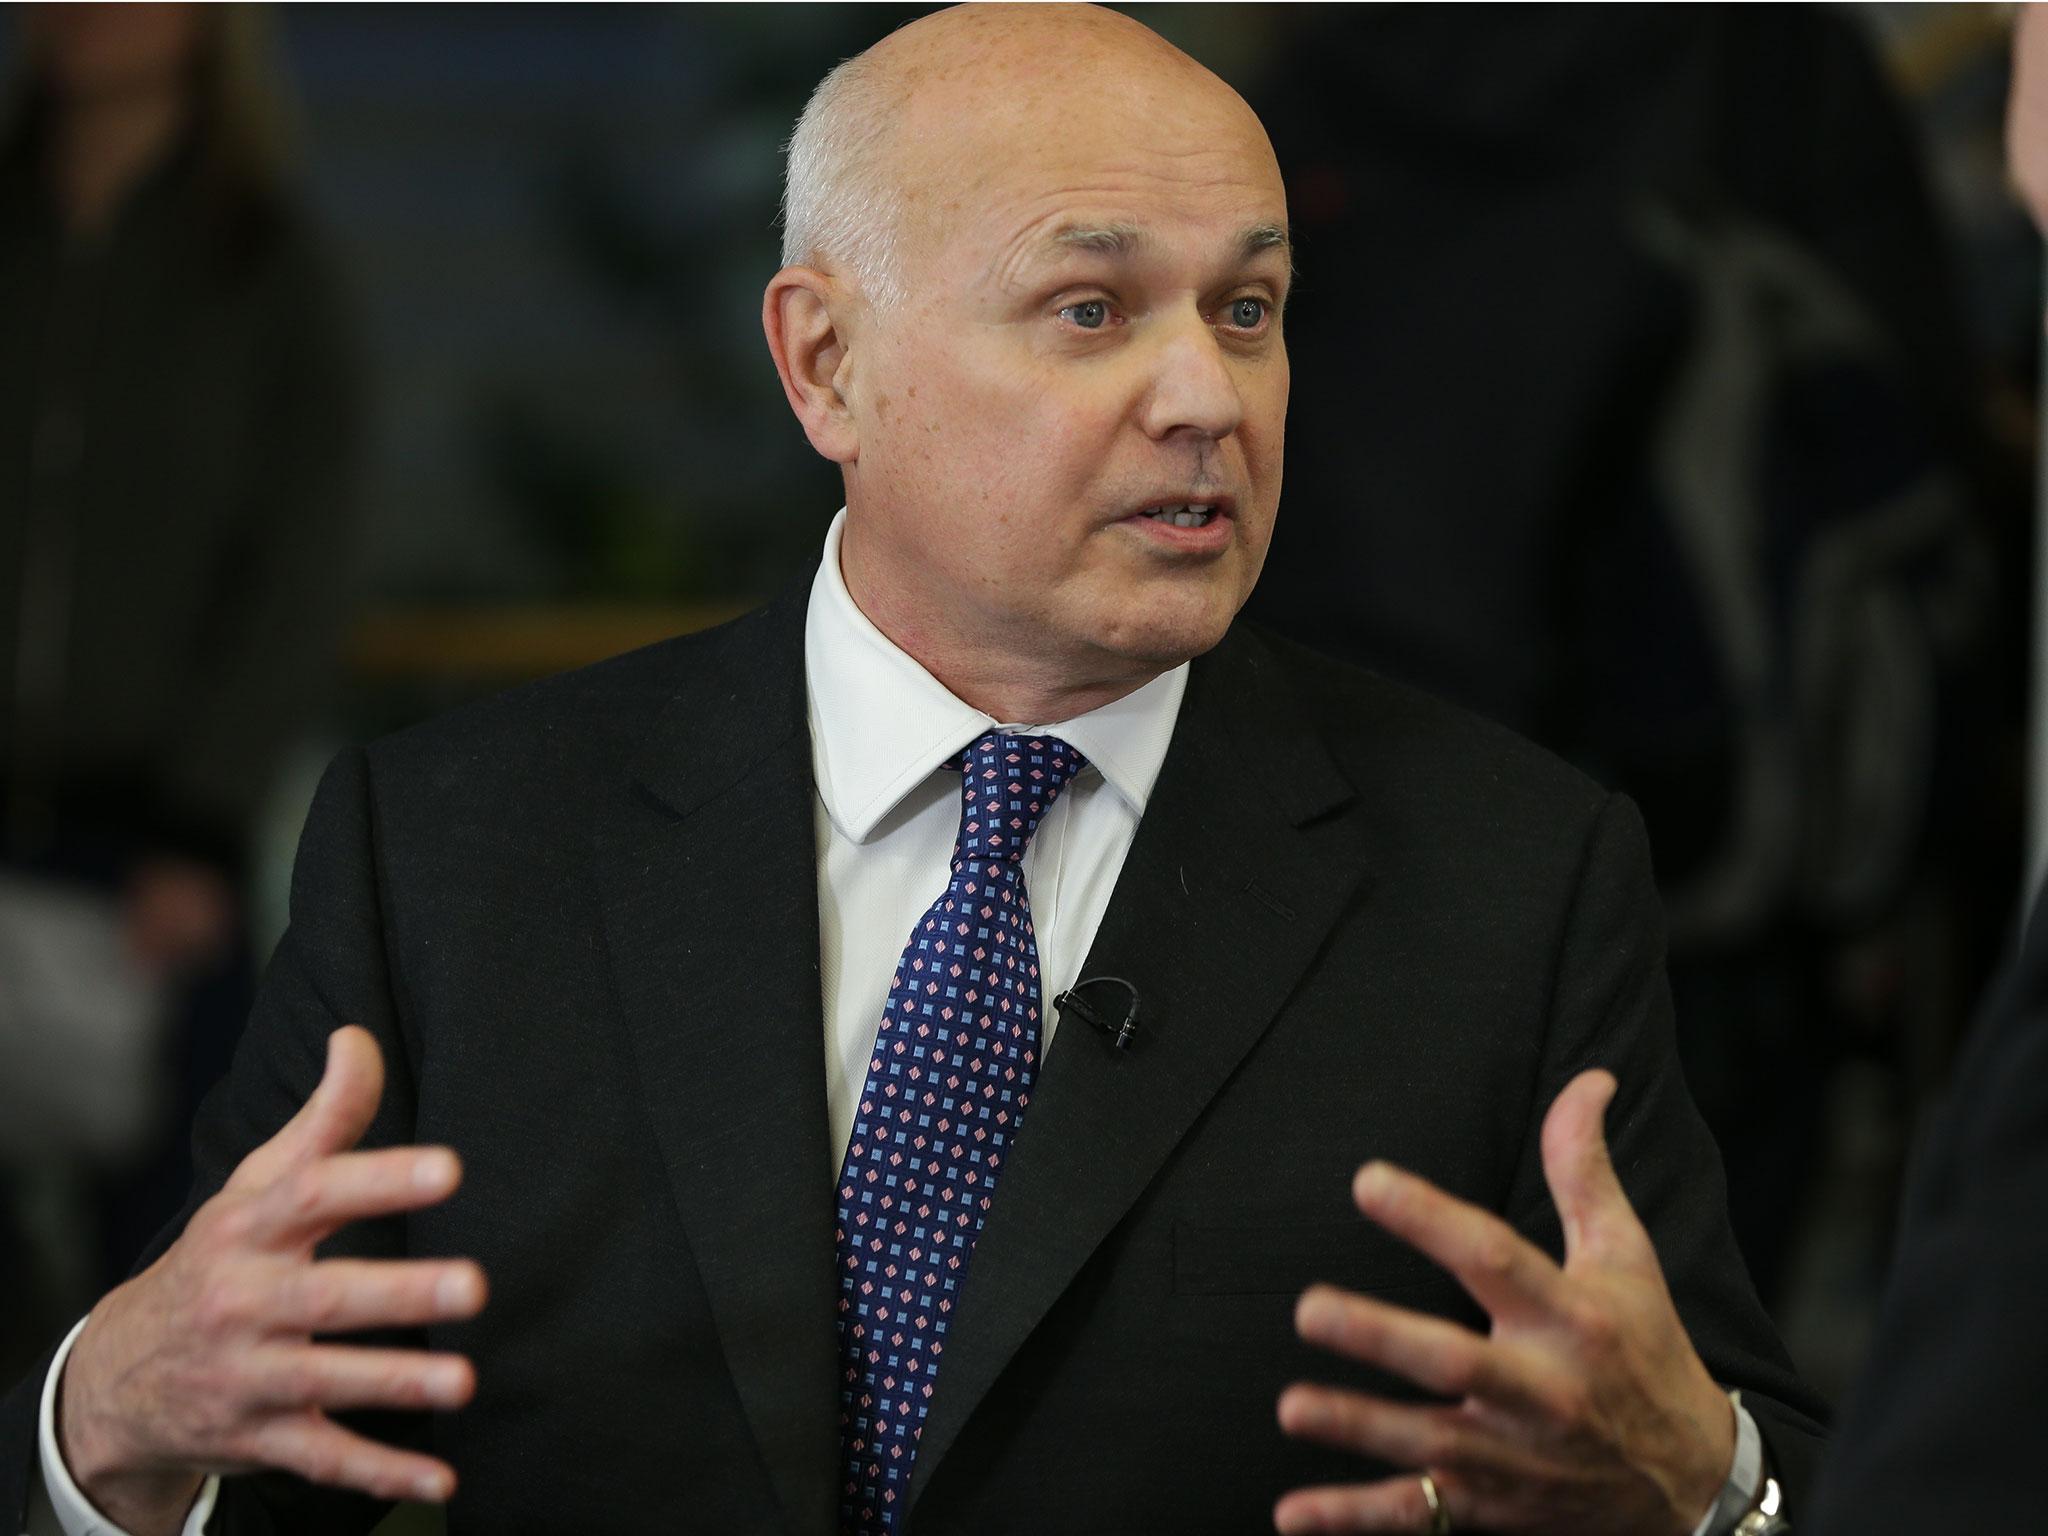 Mr Duncan Smith has decried the amount of personal abuse he has received